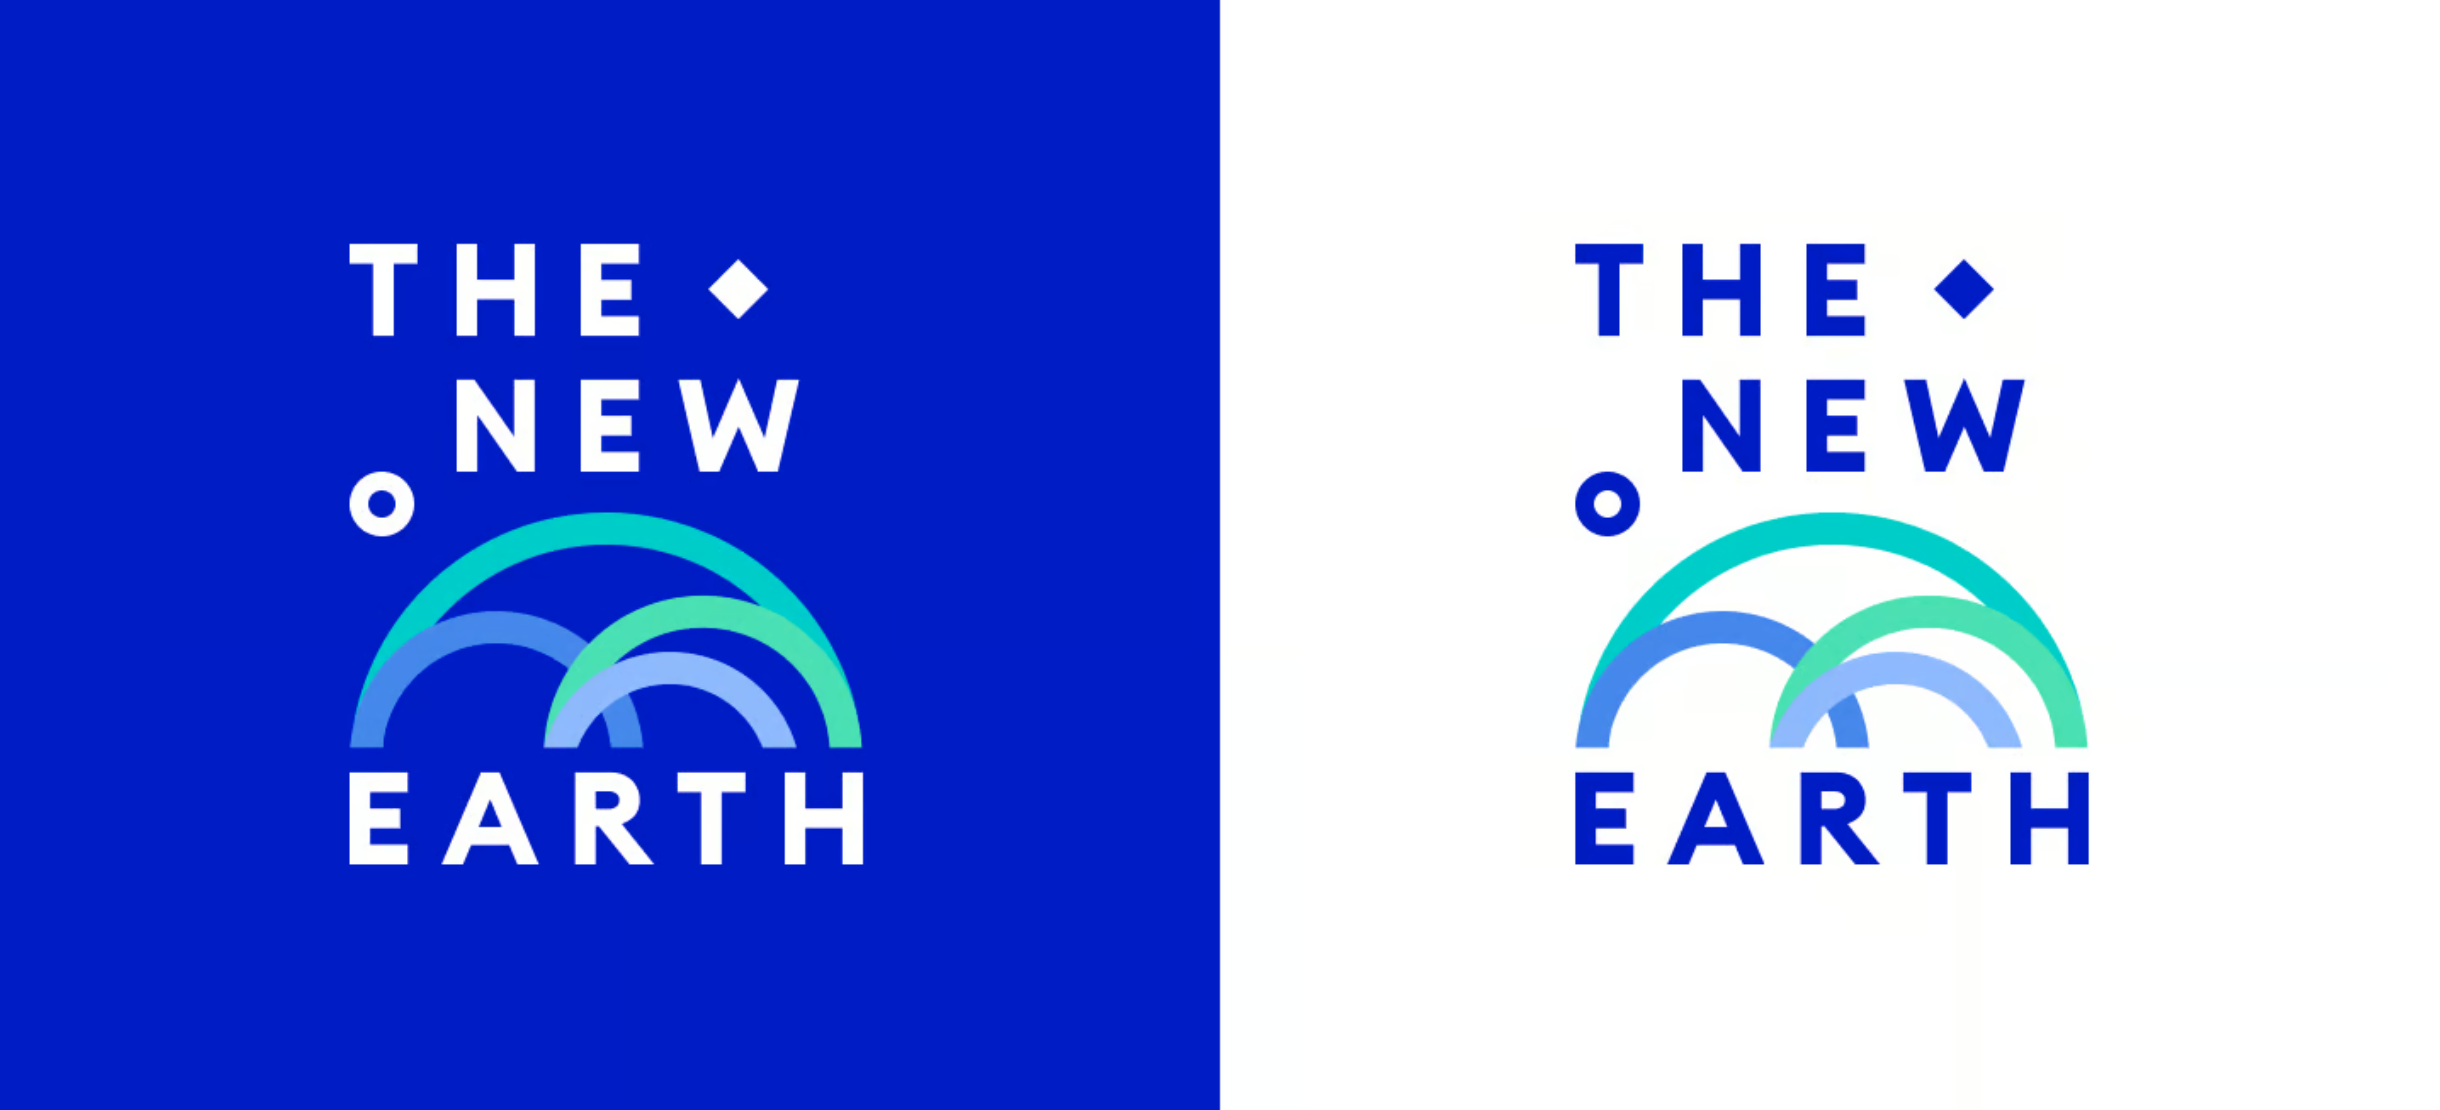 The New Earth Institute